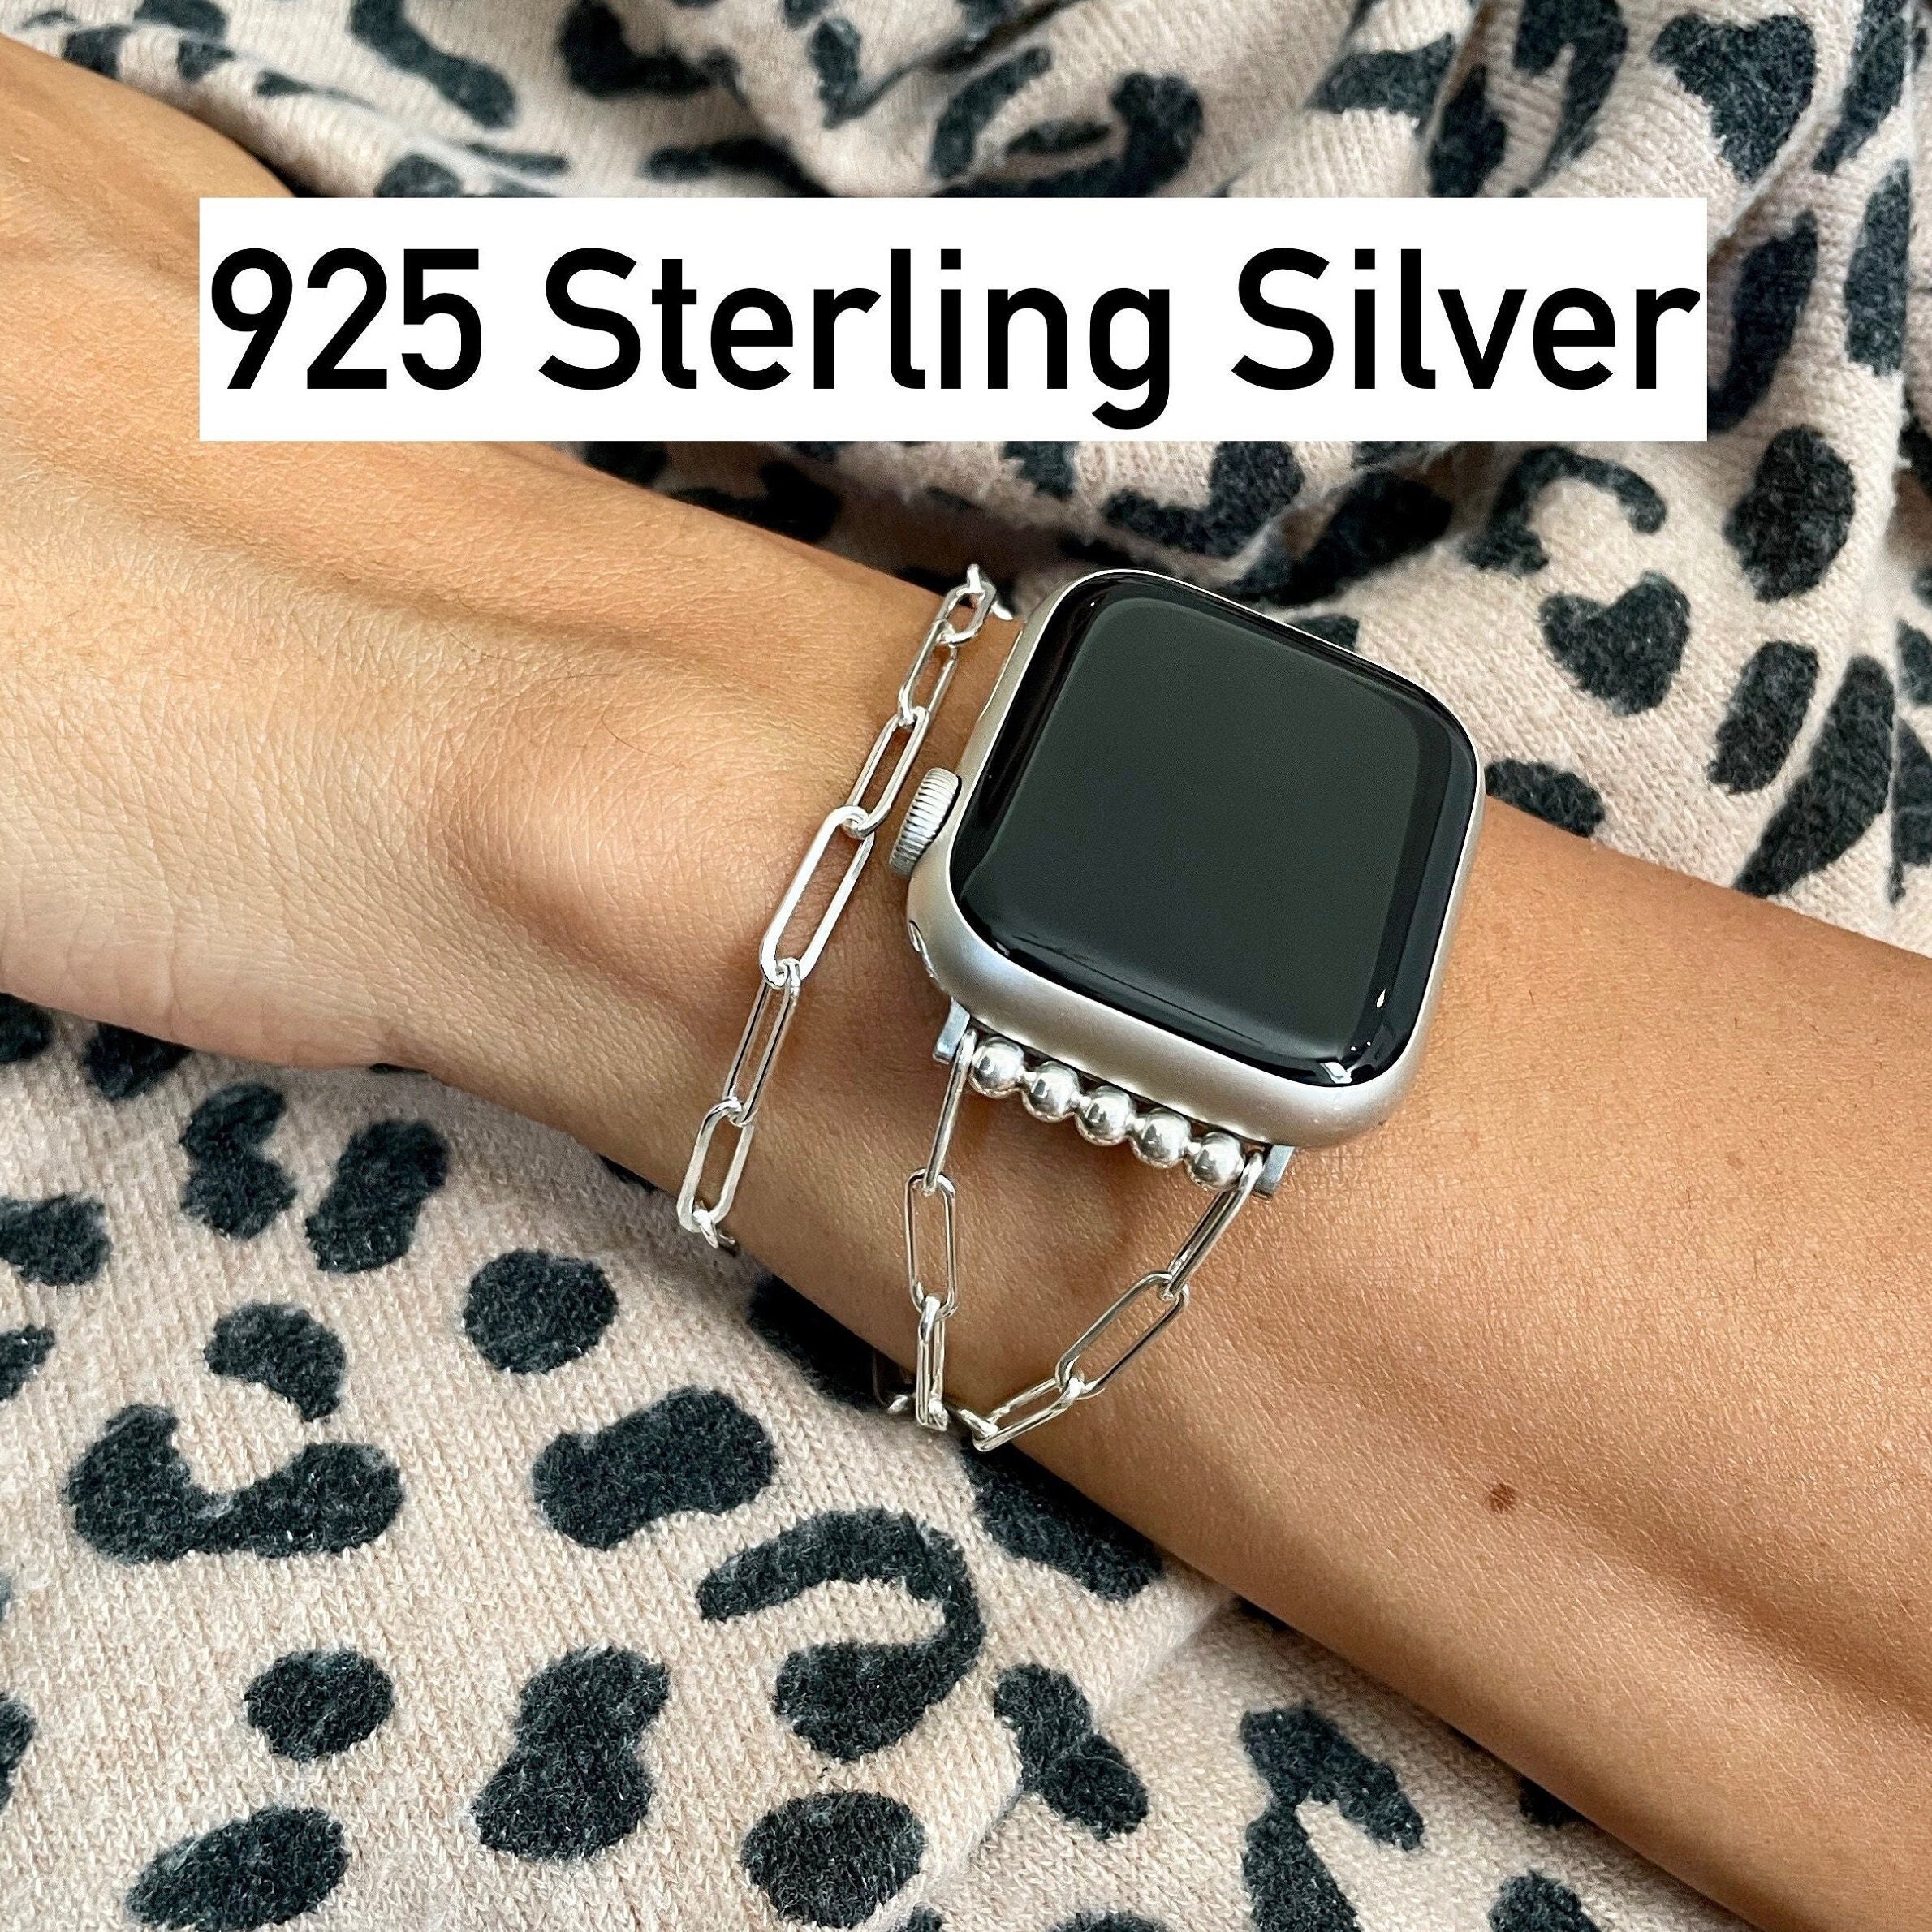 Unisex Boho Chic Apple Watch Band Silver Chain Wrap Bracelet for iWatch  12345678